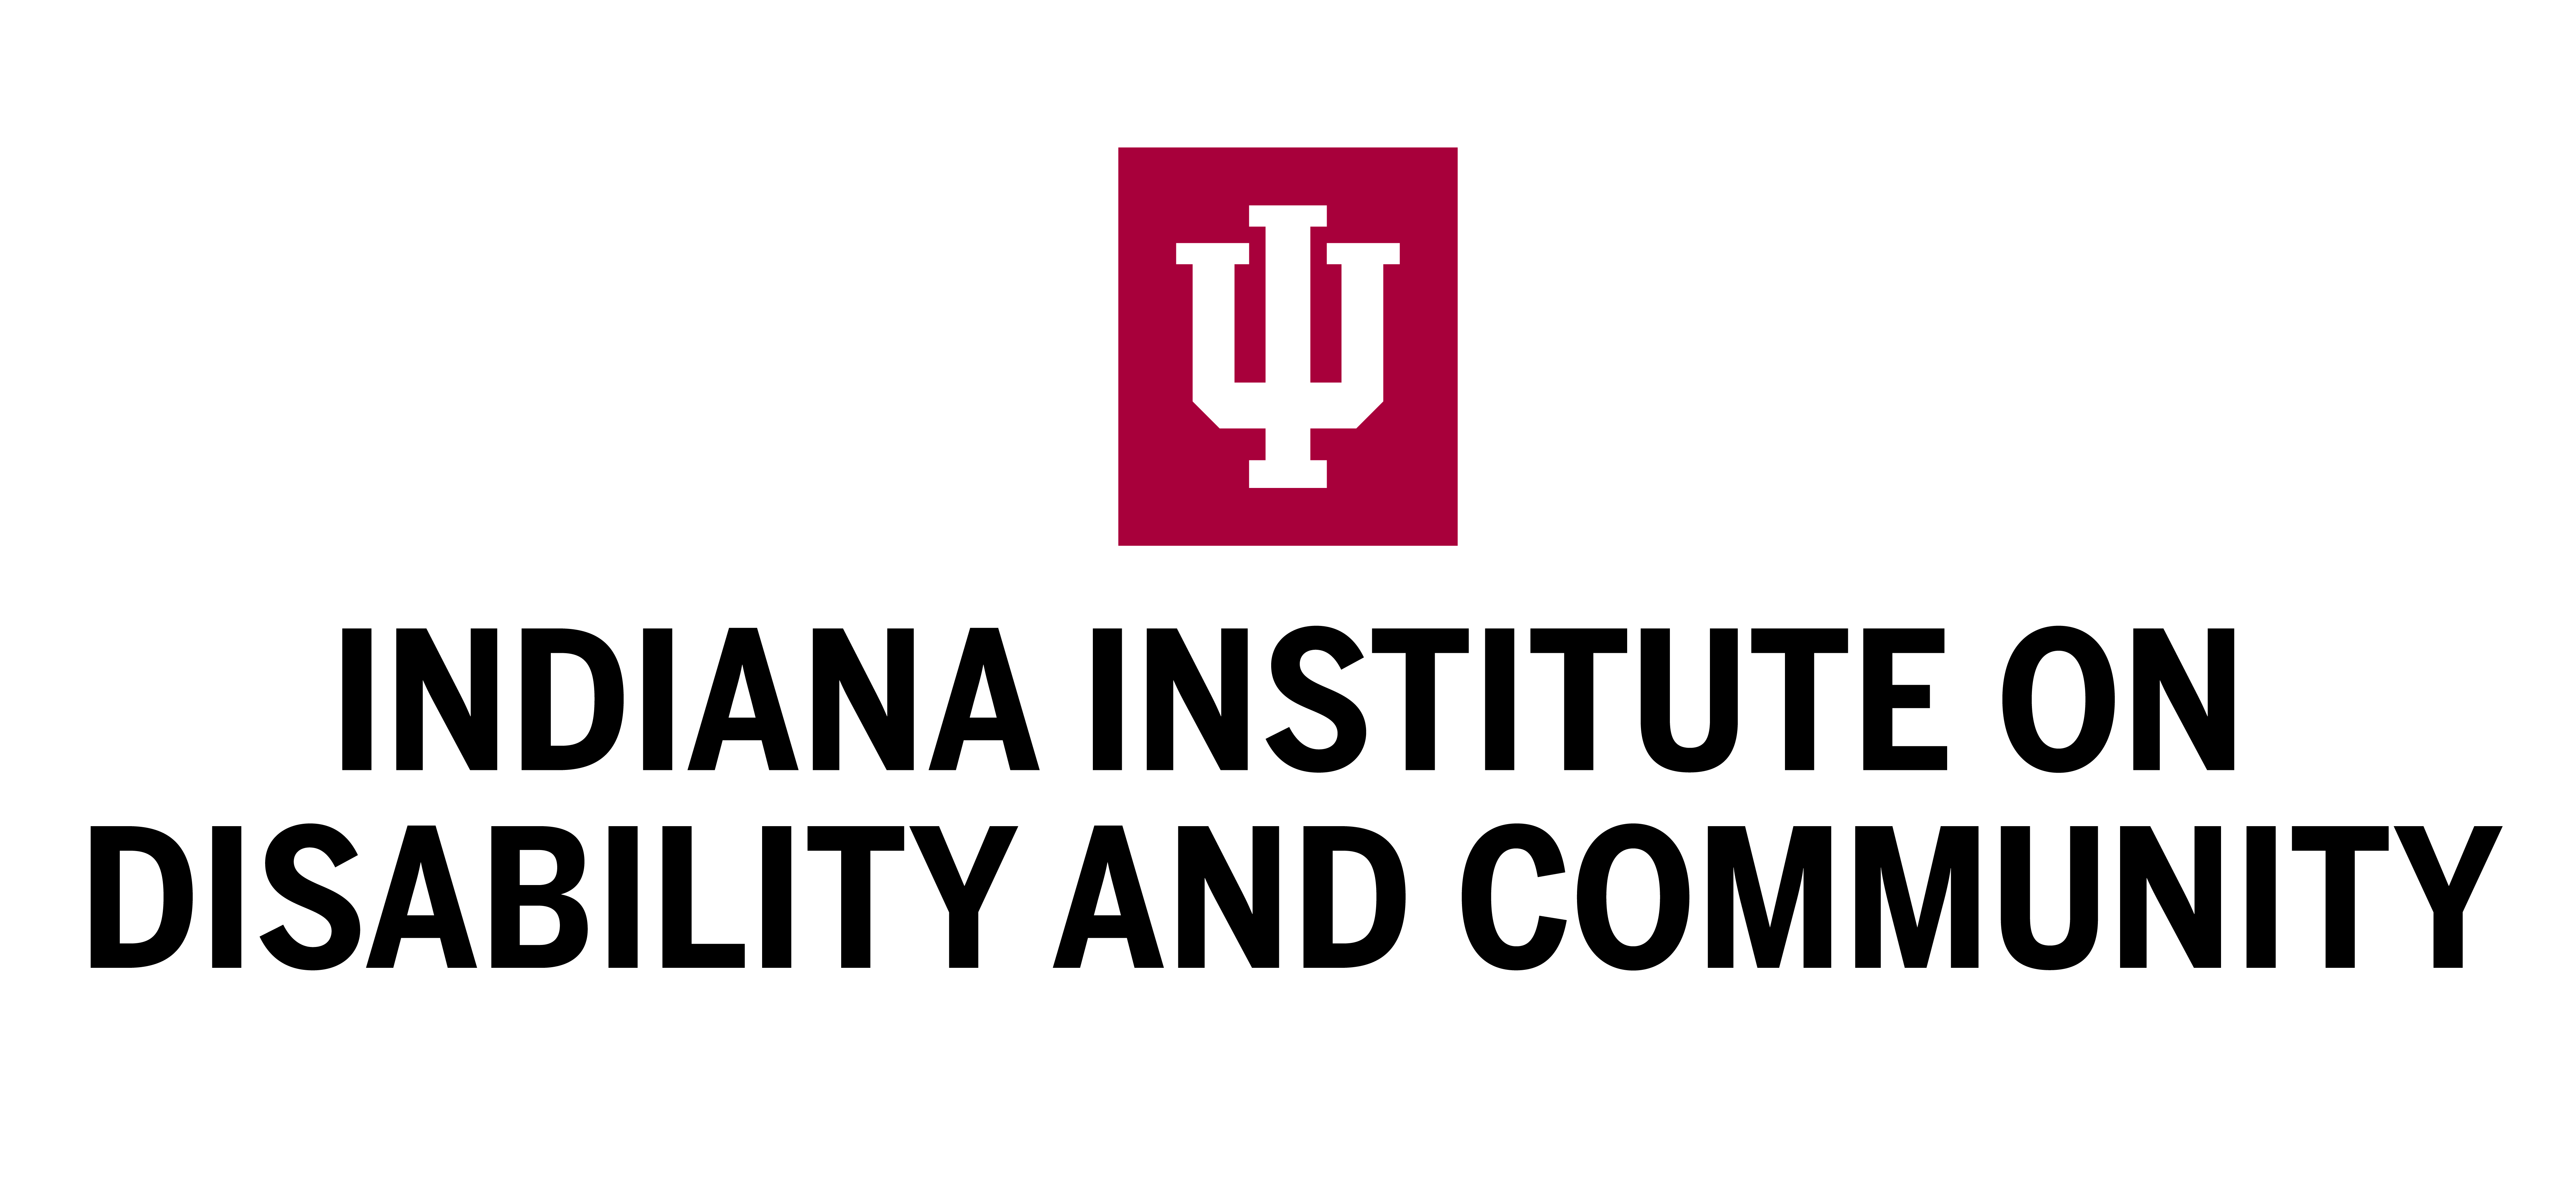 Indiana Institute on Disability and Community